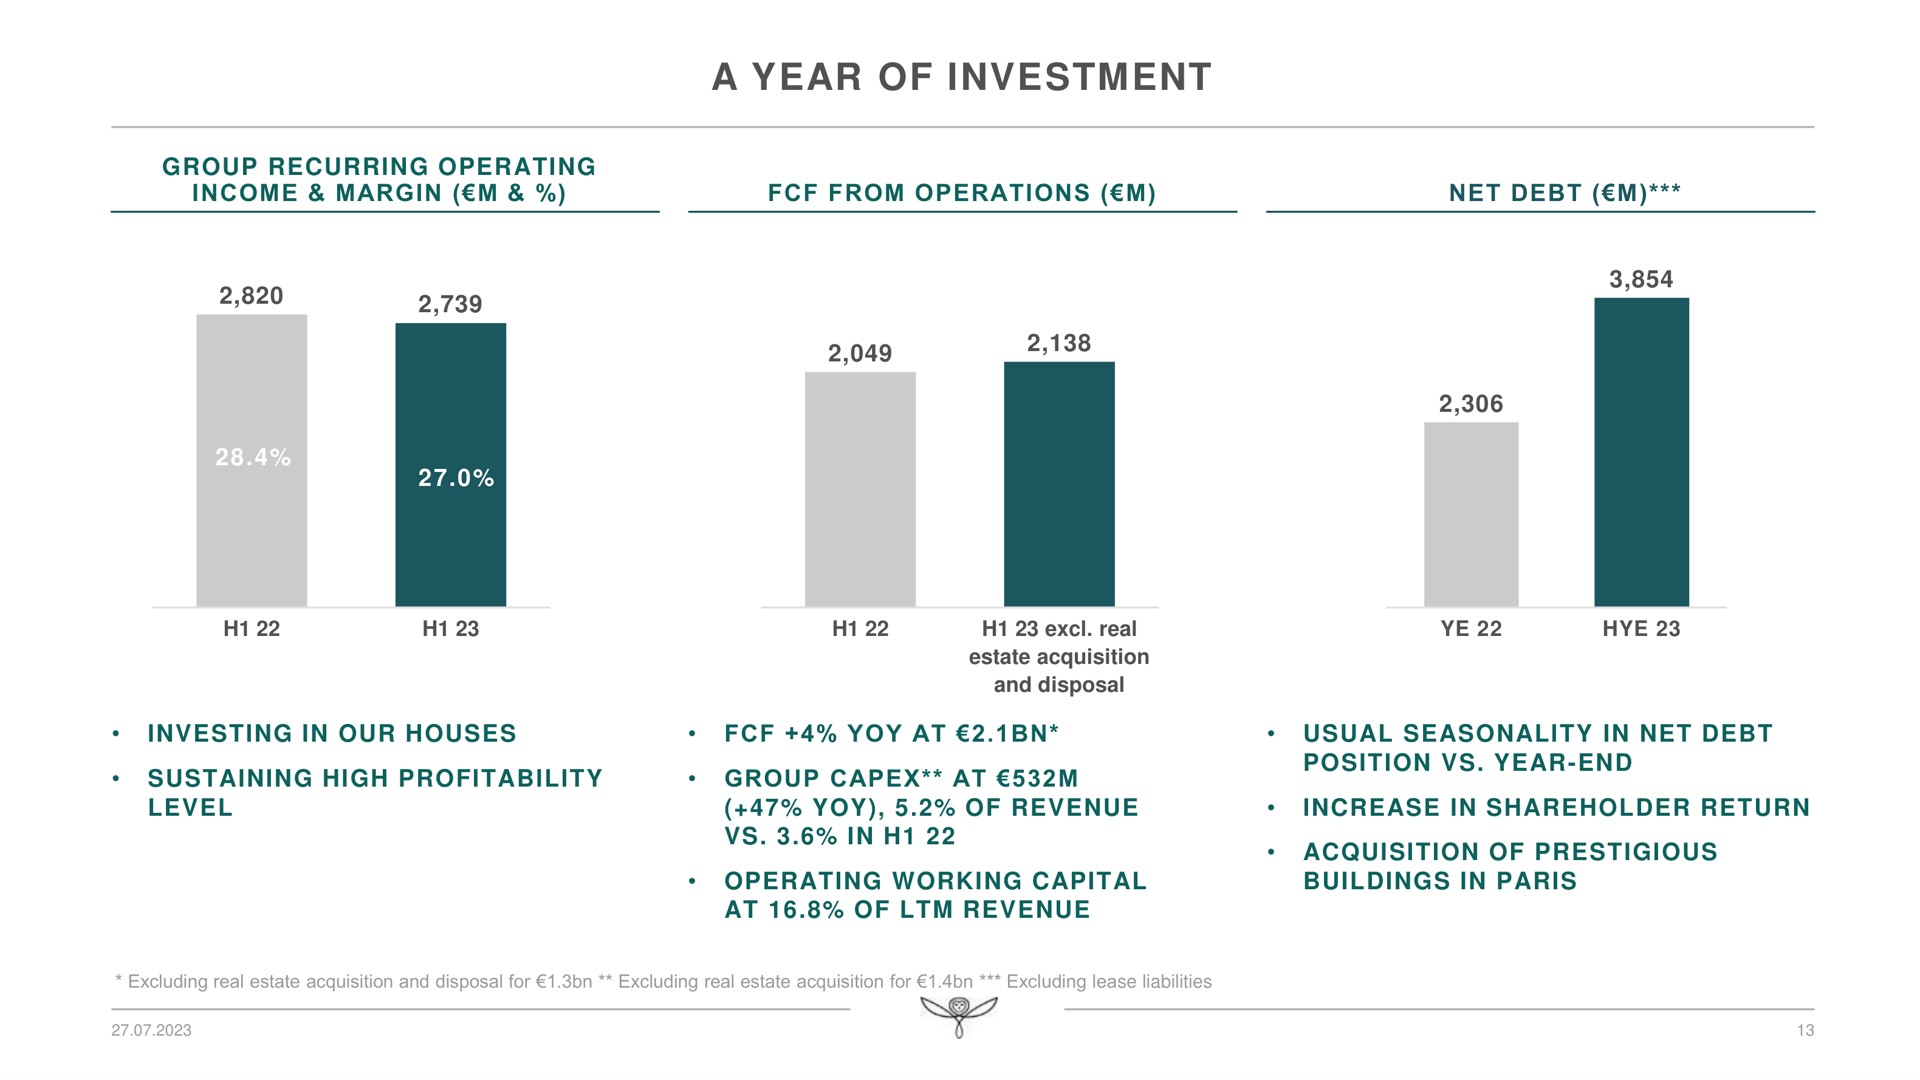 a year of investment | Kering